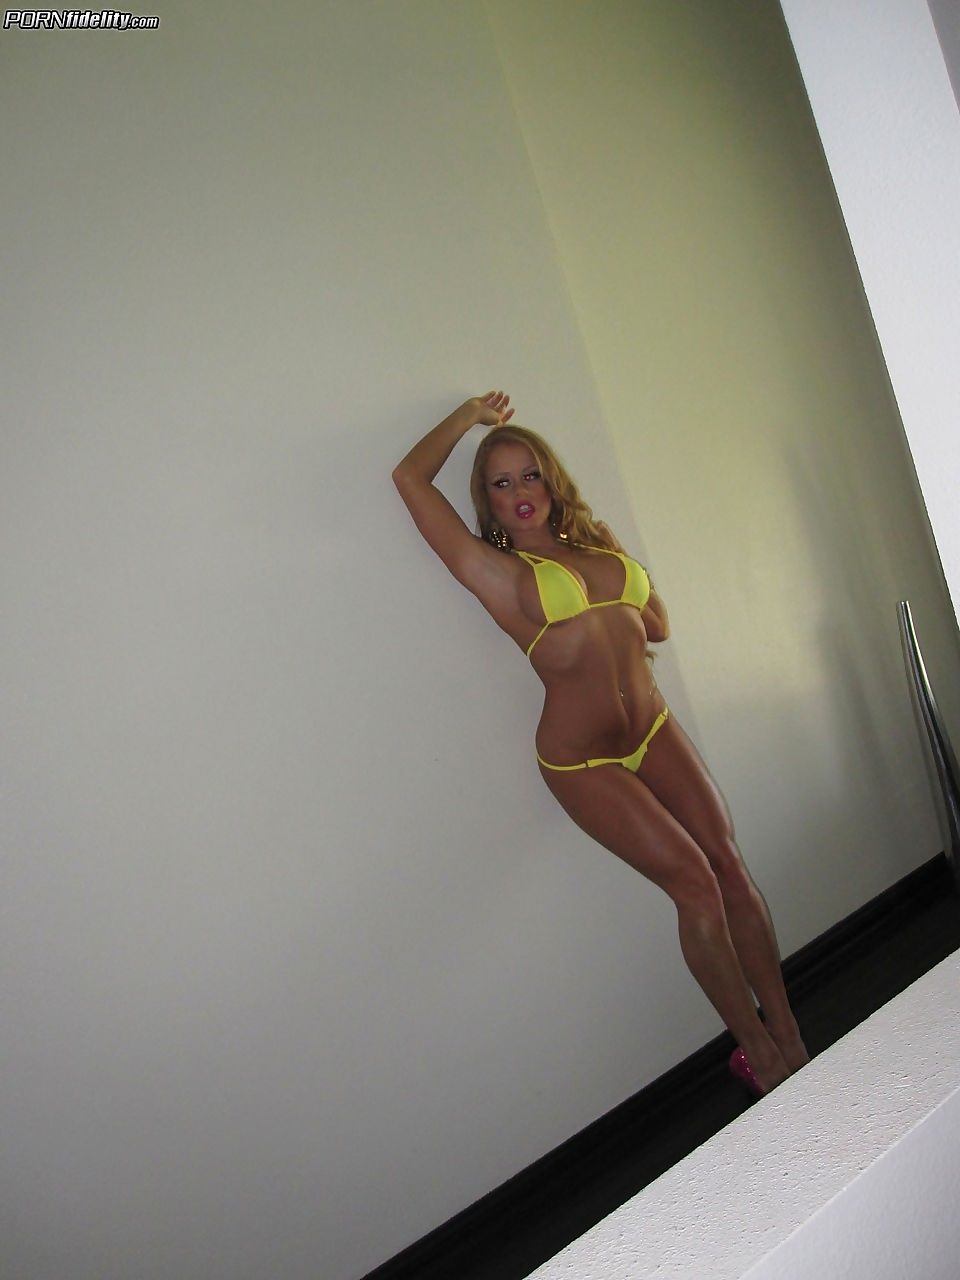 Blonde girl Nikki Delano changes into a bikini after arriving at the Madisons